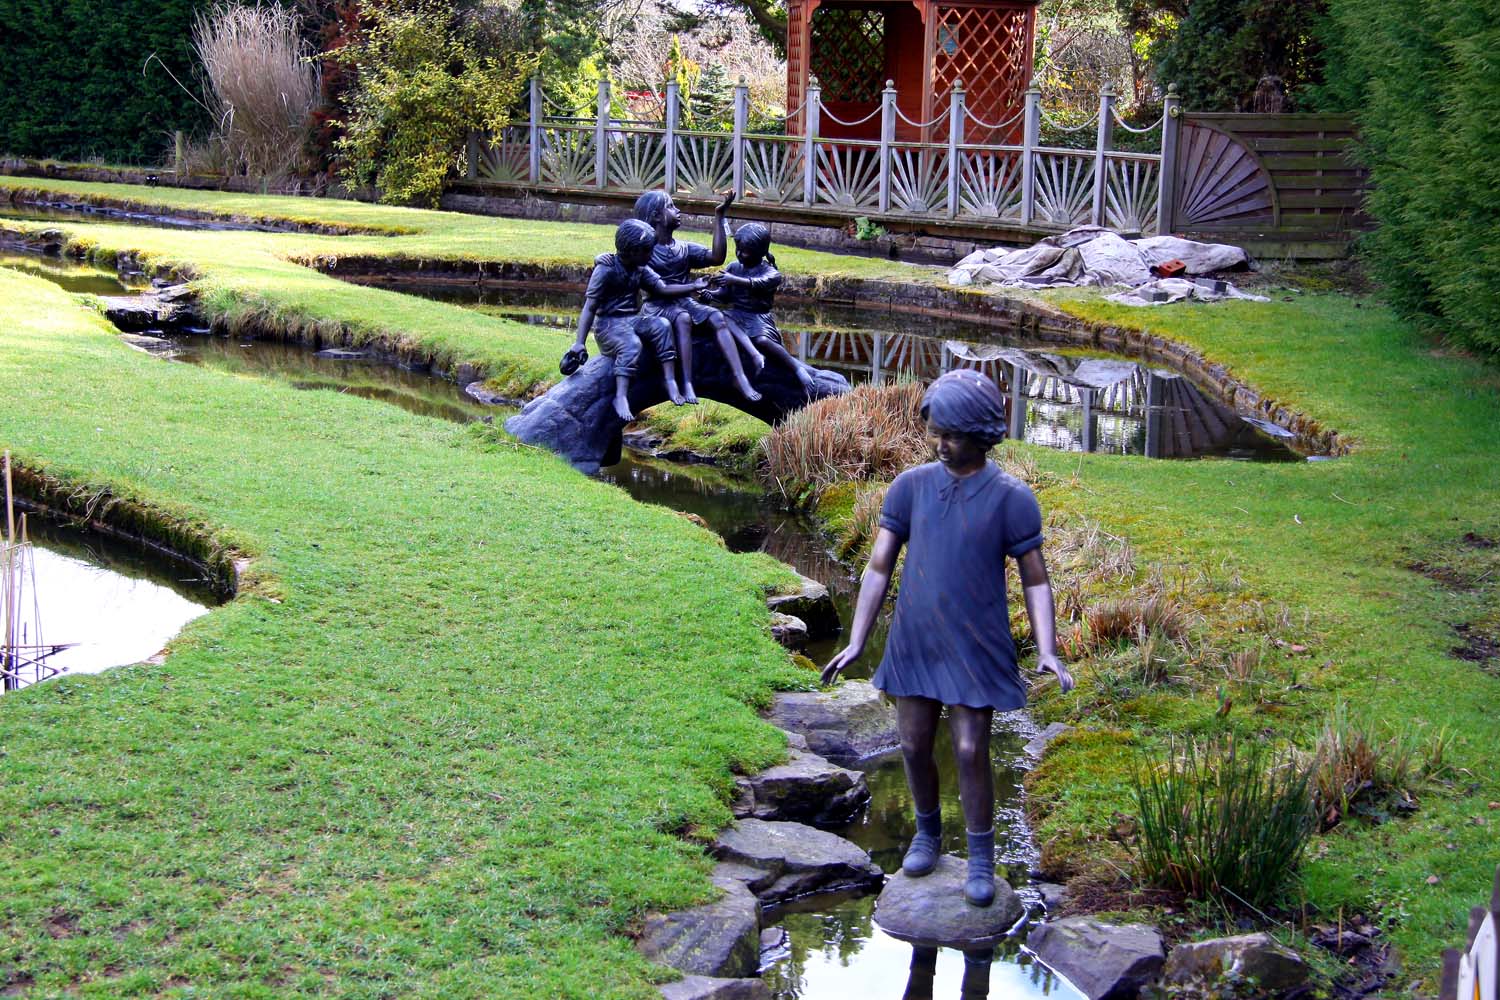 File:Statues in Stapeley Water Gardens - geograph.org.uk - 1777478.jpg -  Wikimedia Commons